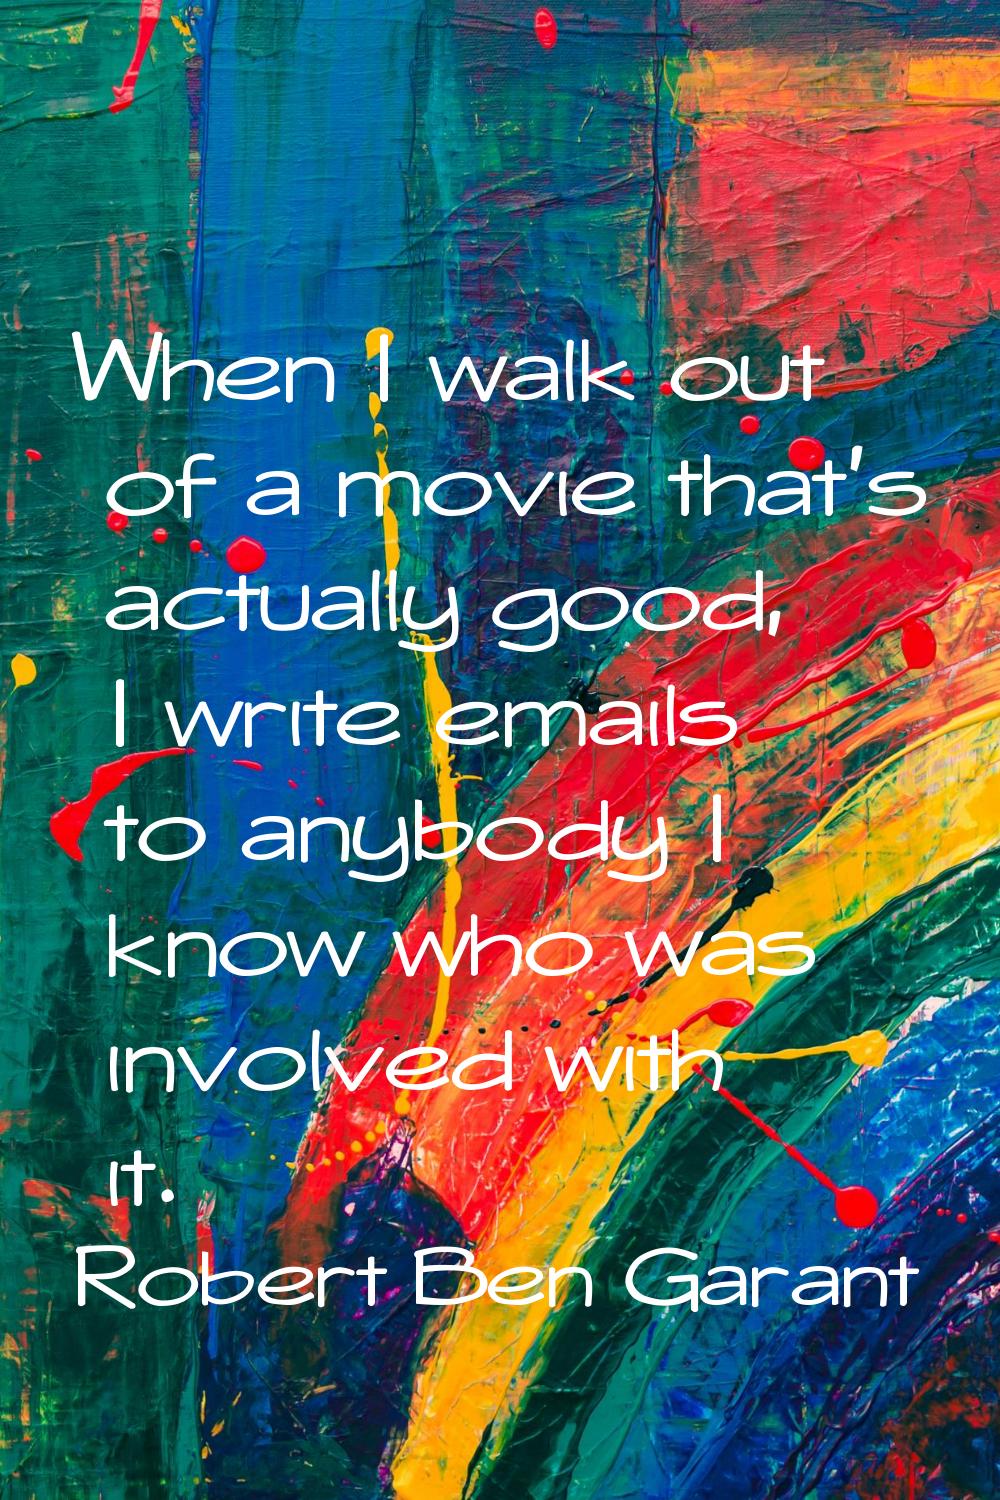 When I walk out of a movie that's actually good, I write emails to anybody I know who was involved 